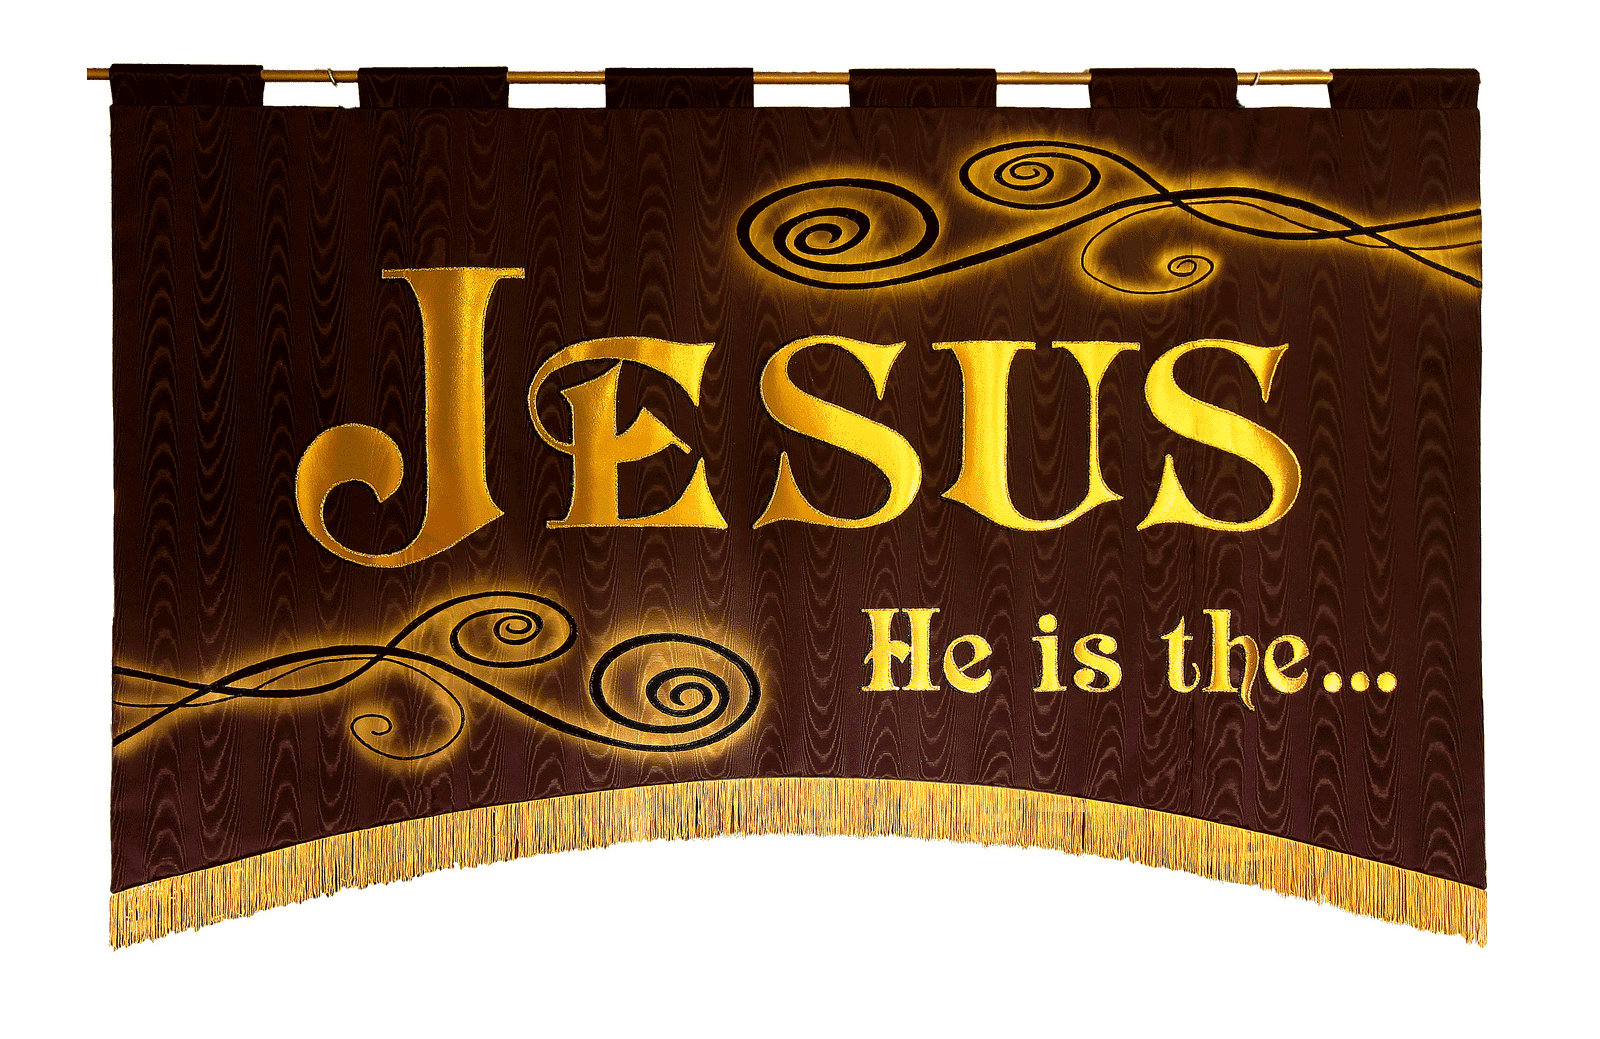 This Church Fabric Wall Banner has a brown background which provides contrast with the gold lame letters